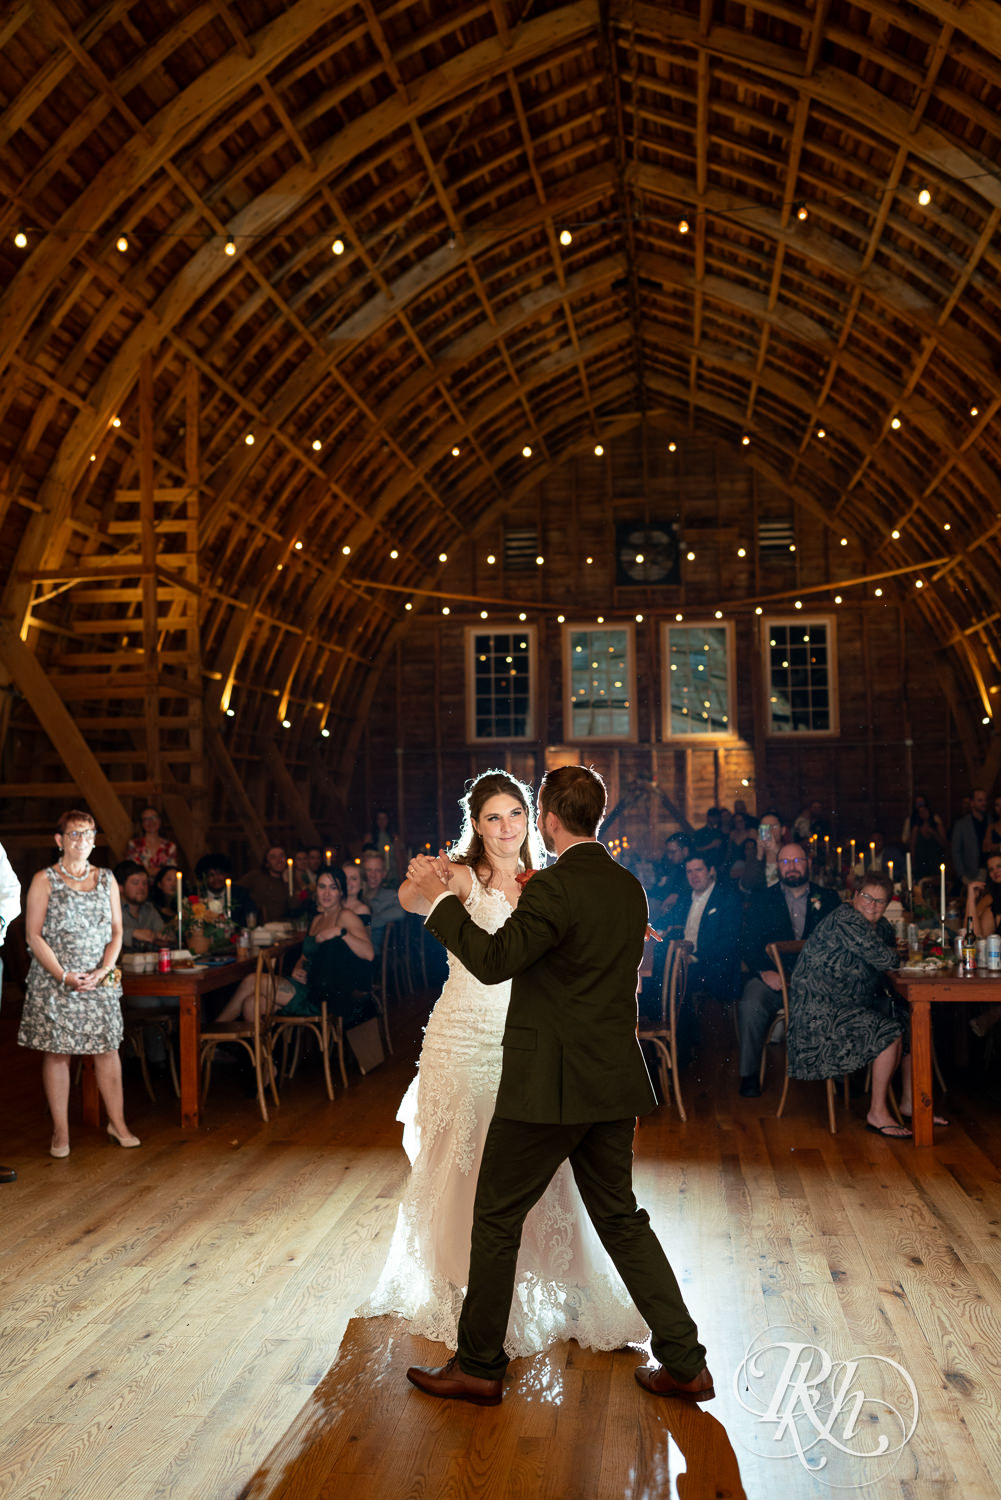 Bride and groom share first dance at Hayvn at Hay River in Boyceville, Wisconsin. 